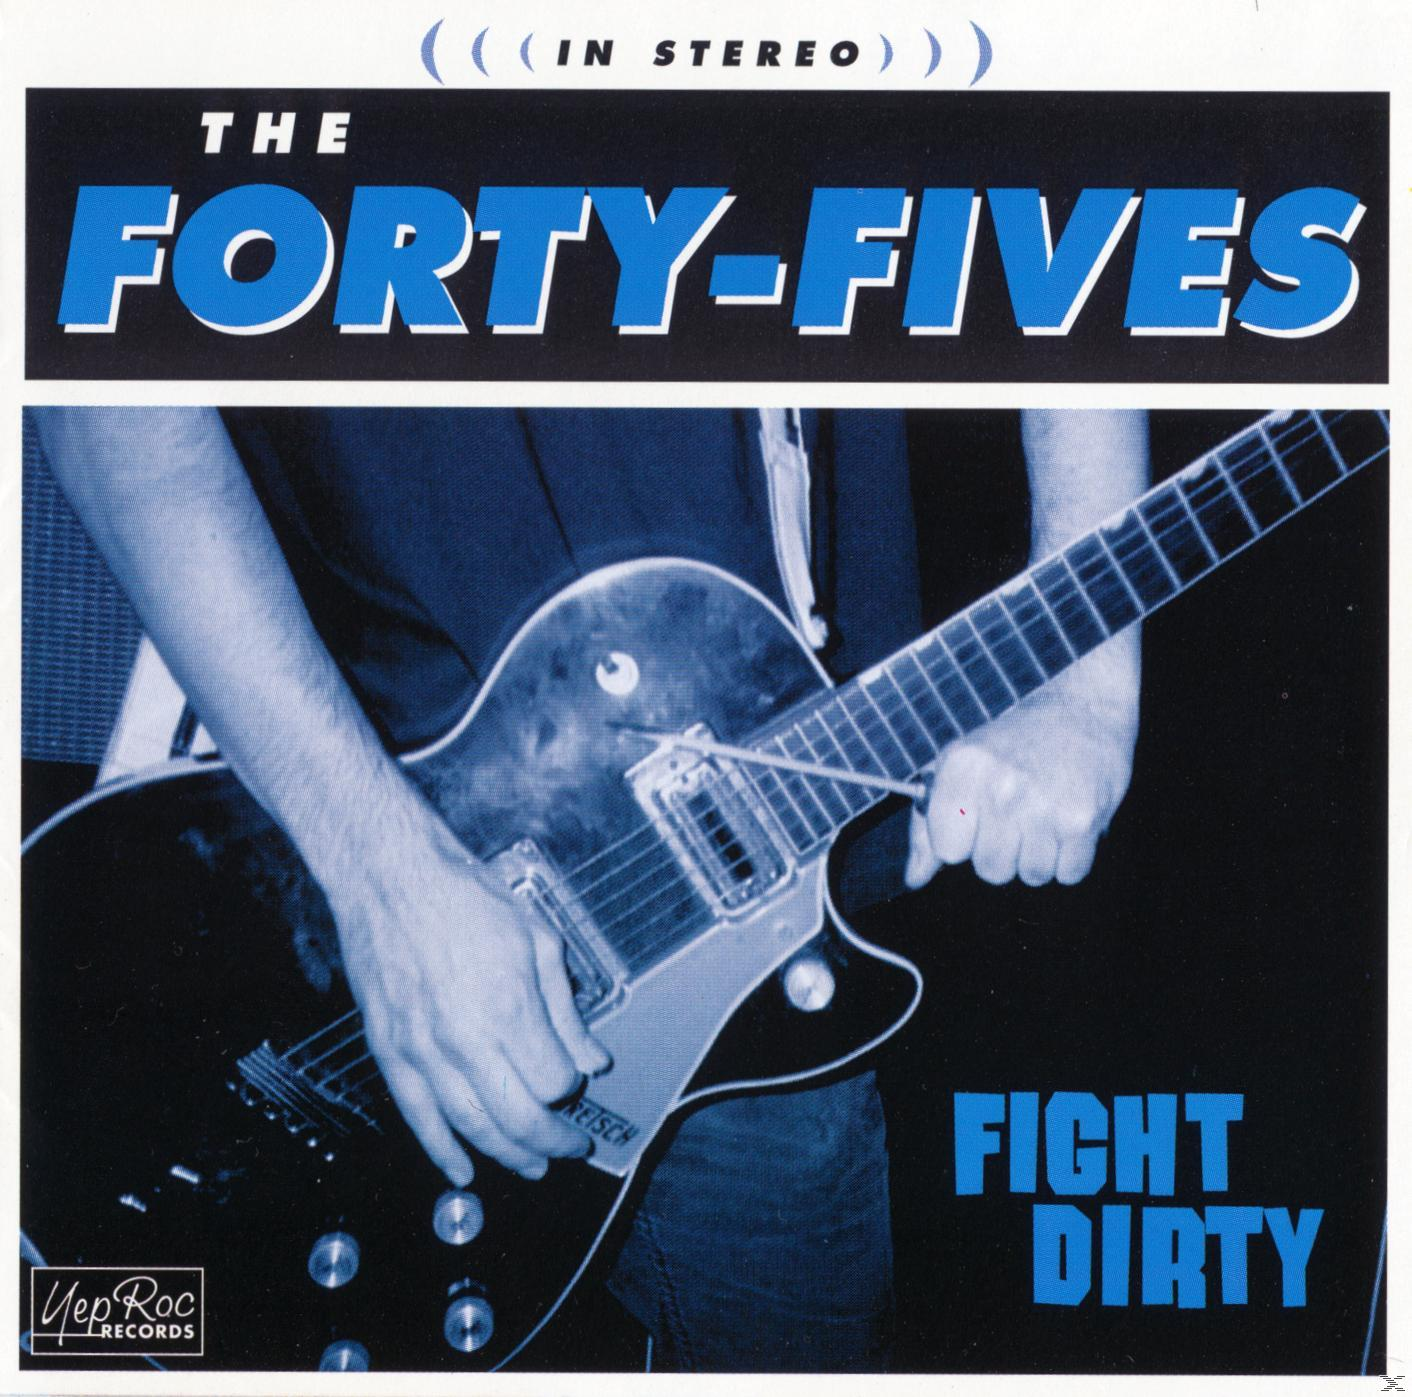 Dirty Forty-fives Fight - (CD) -